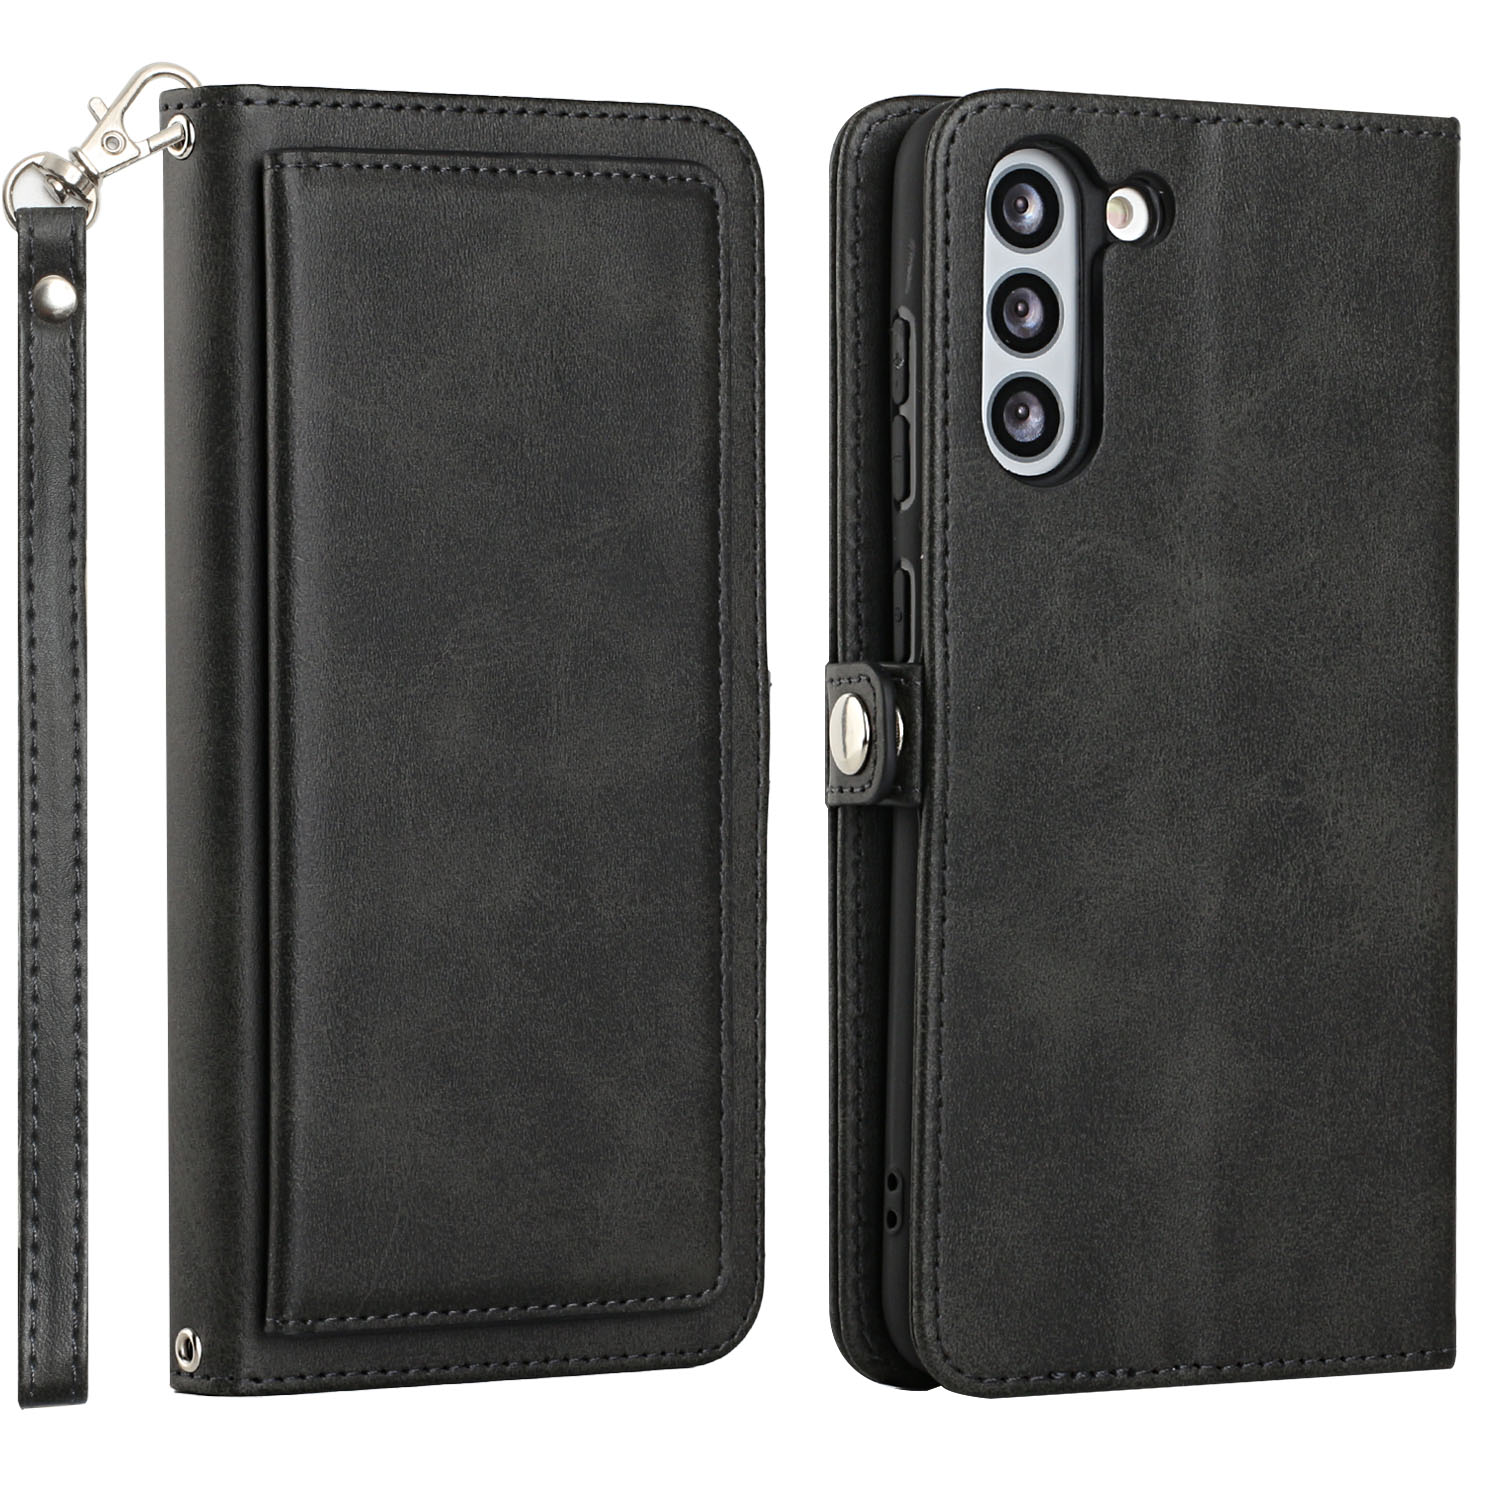 Premium PU Leather Folio WALLET Front Cover Case for Galaxy S21 FE (Black)